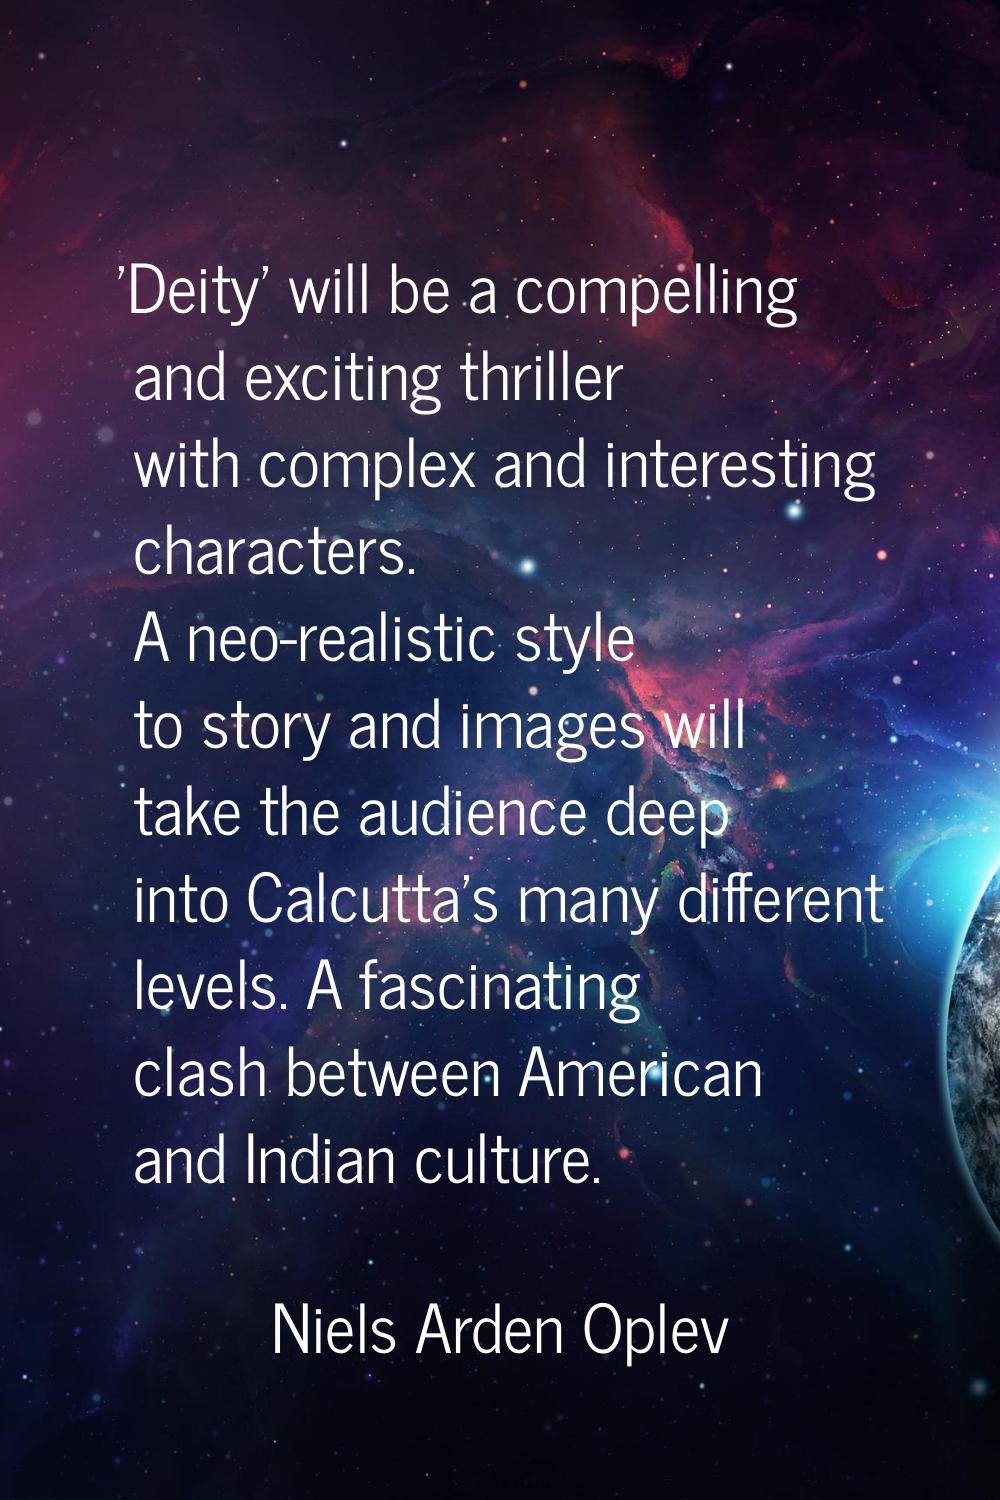 'Deity' will be a compelling and exciting thriller with complex and interesting characters. A neo-r